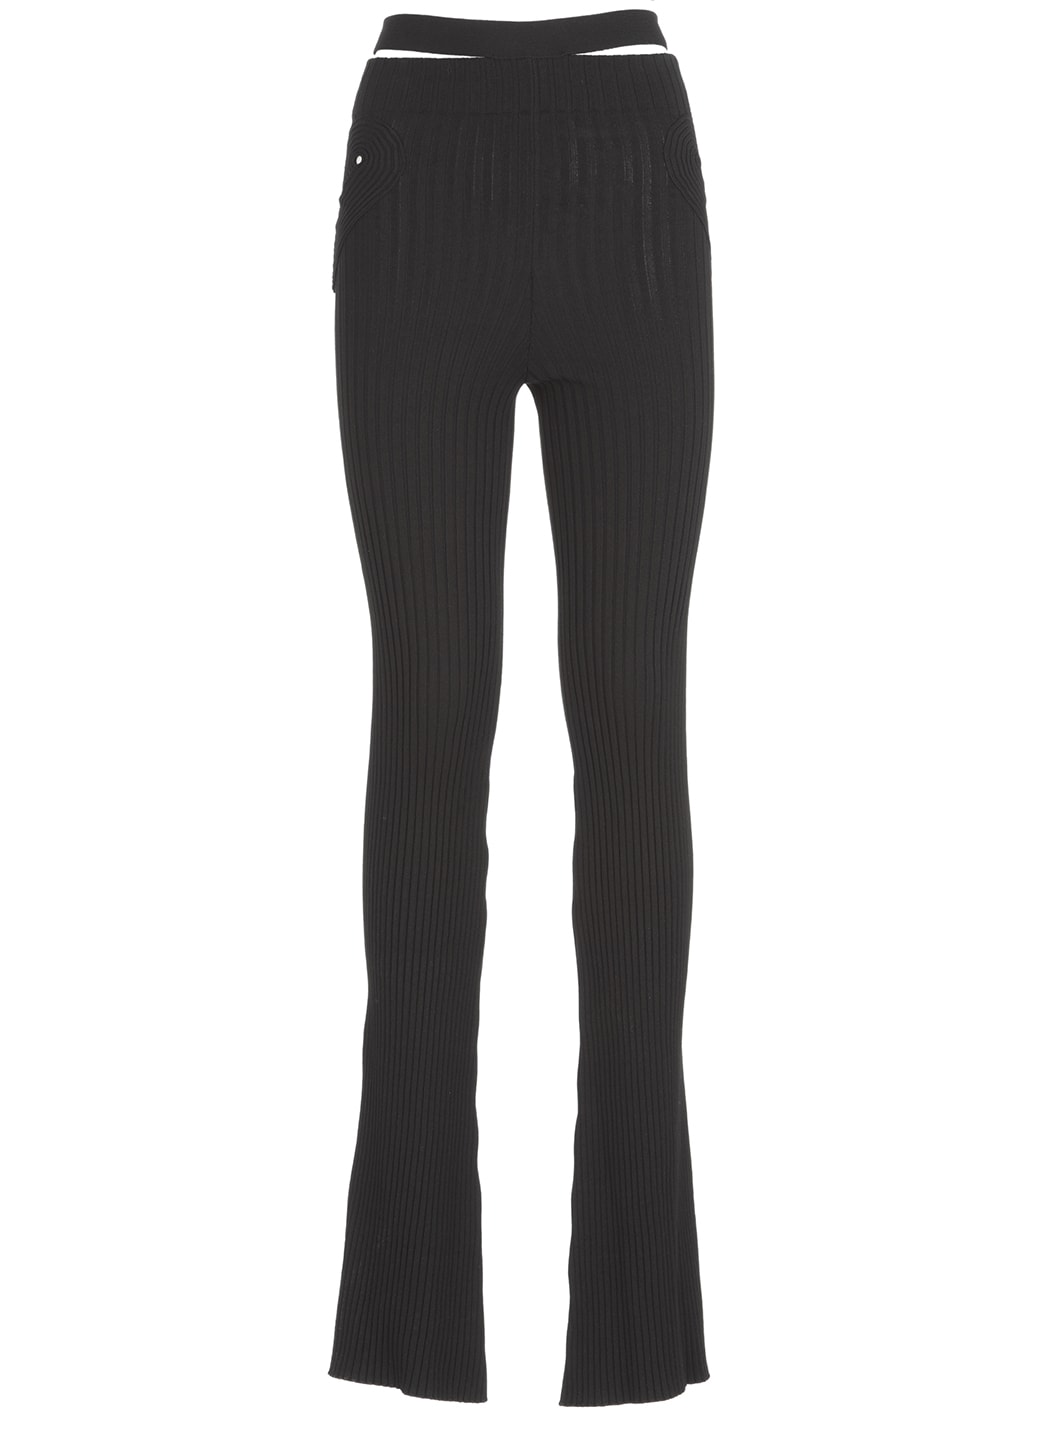 ANDREADAMO Knitted Flared Pants